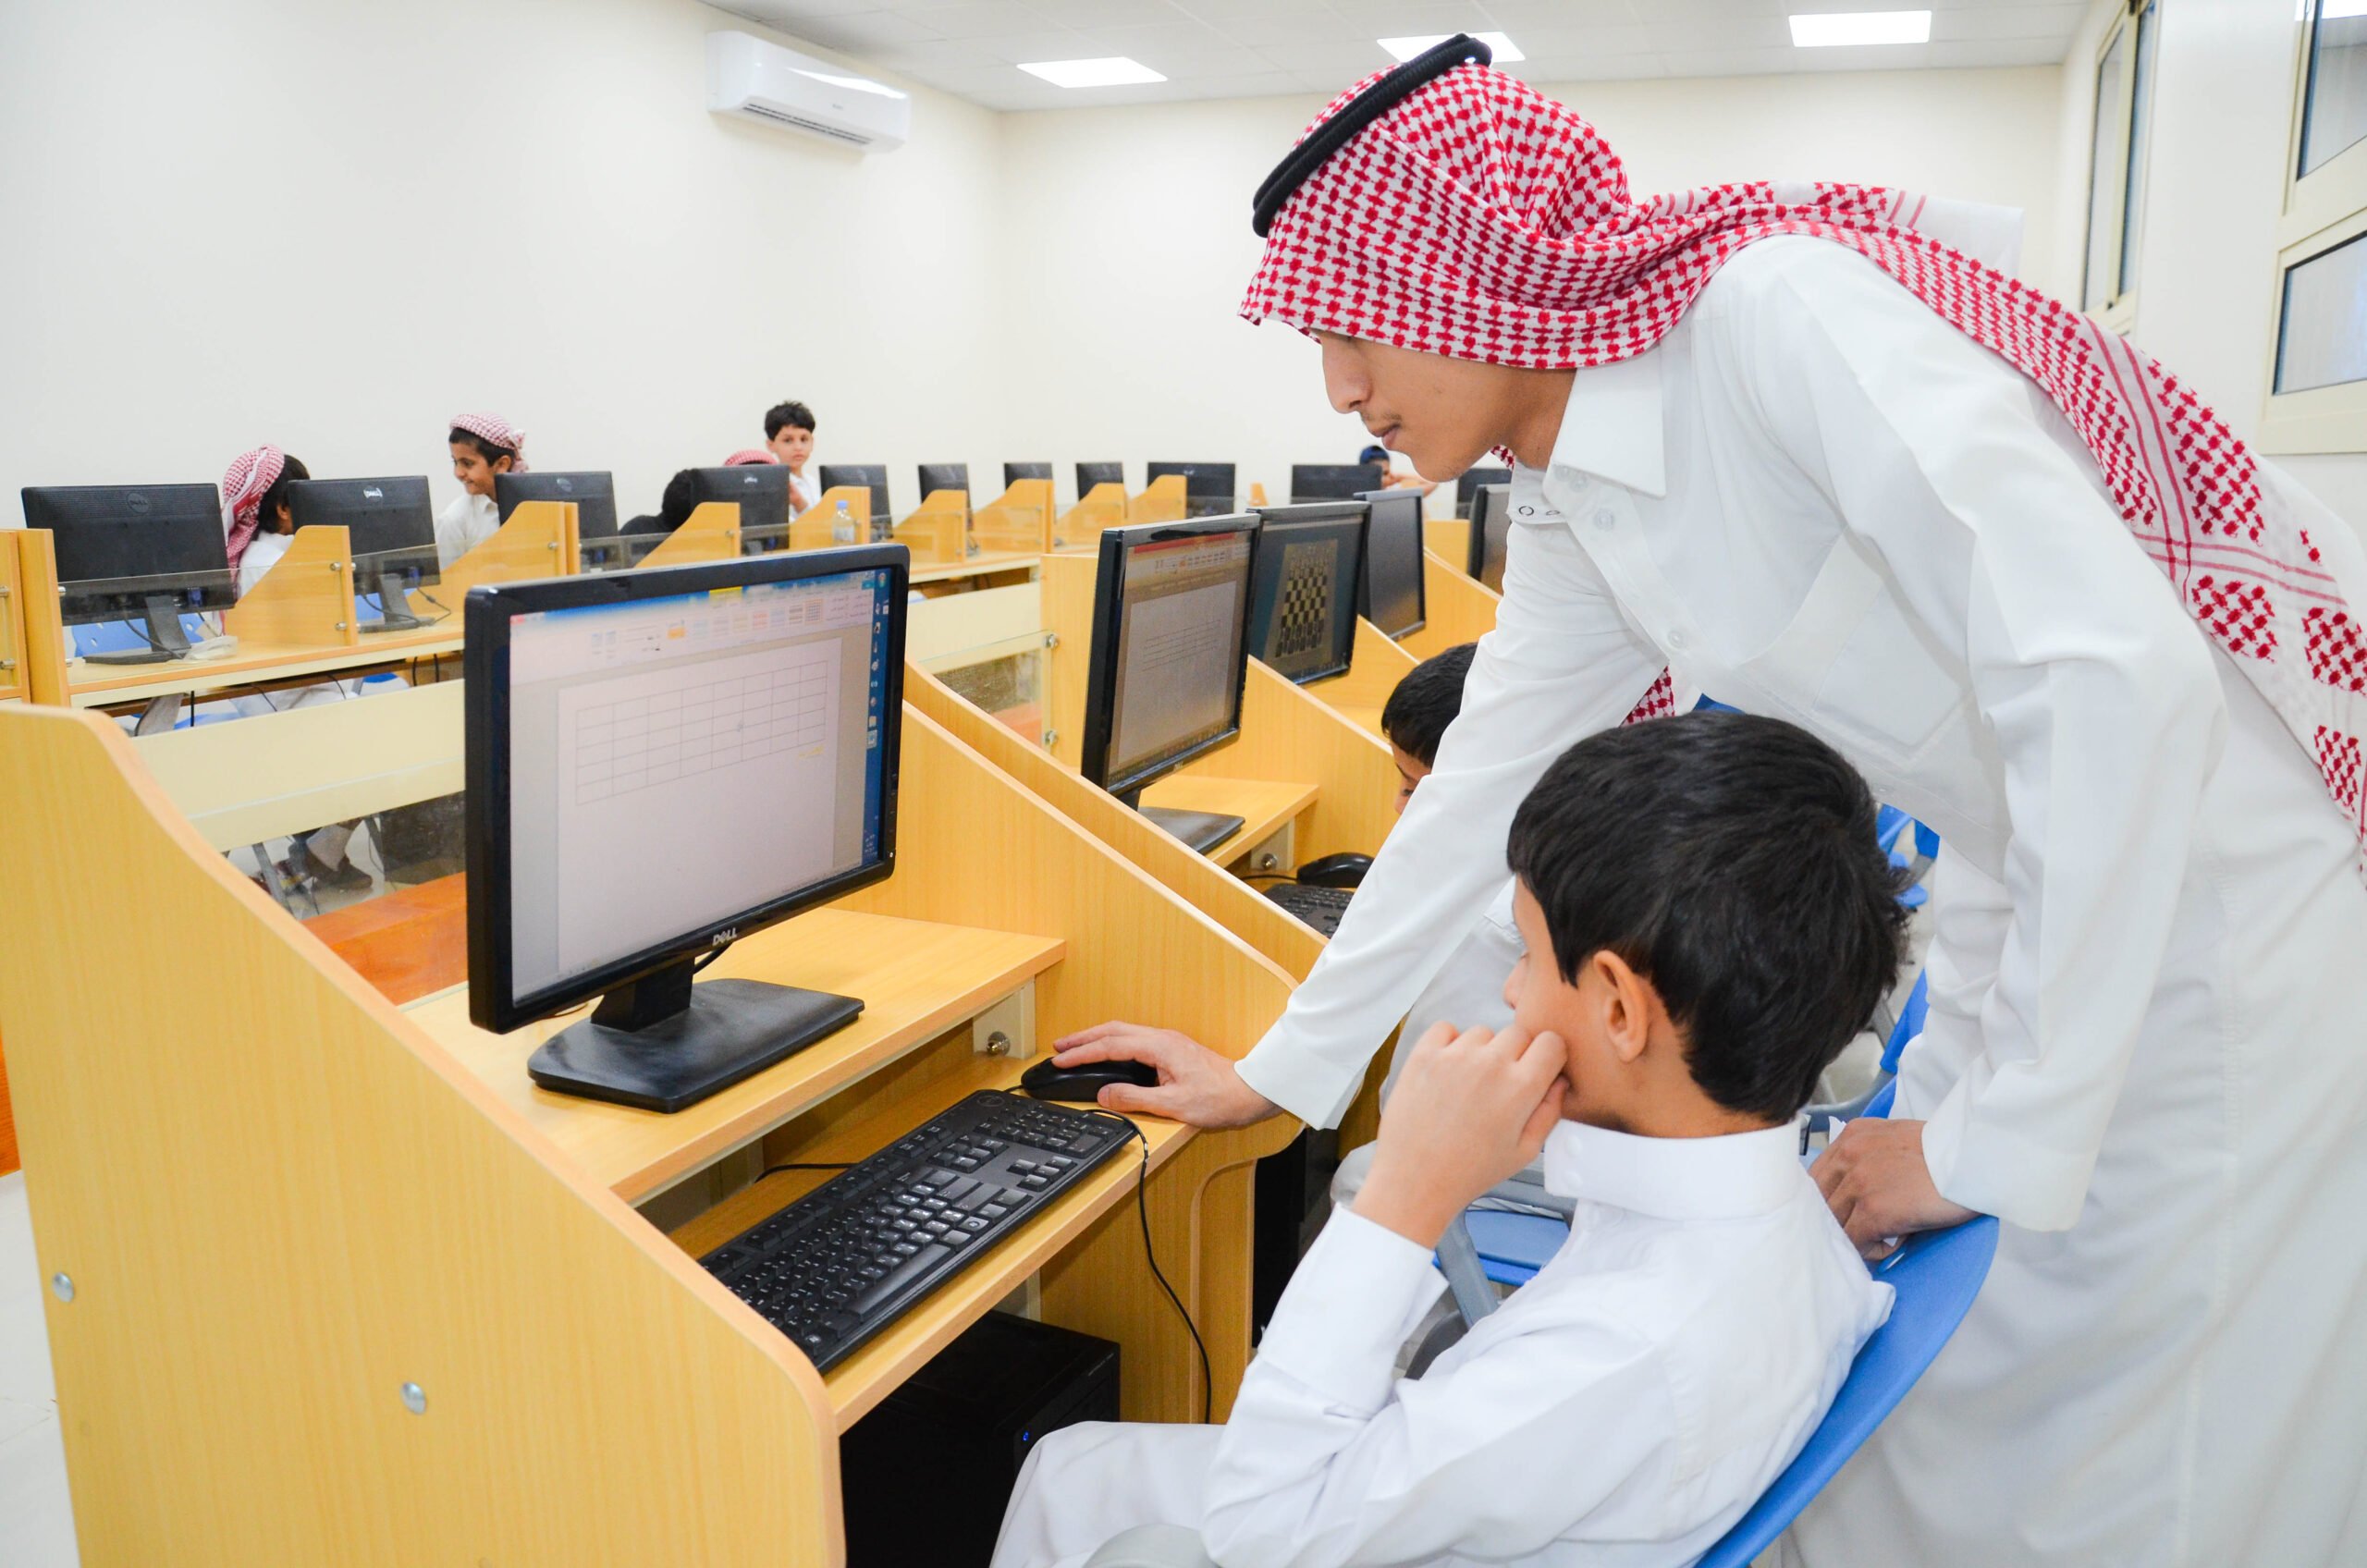 Want to learn about education in the Arab world? Search no more. Find out what education means to the Arab society and its system. Click here for more